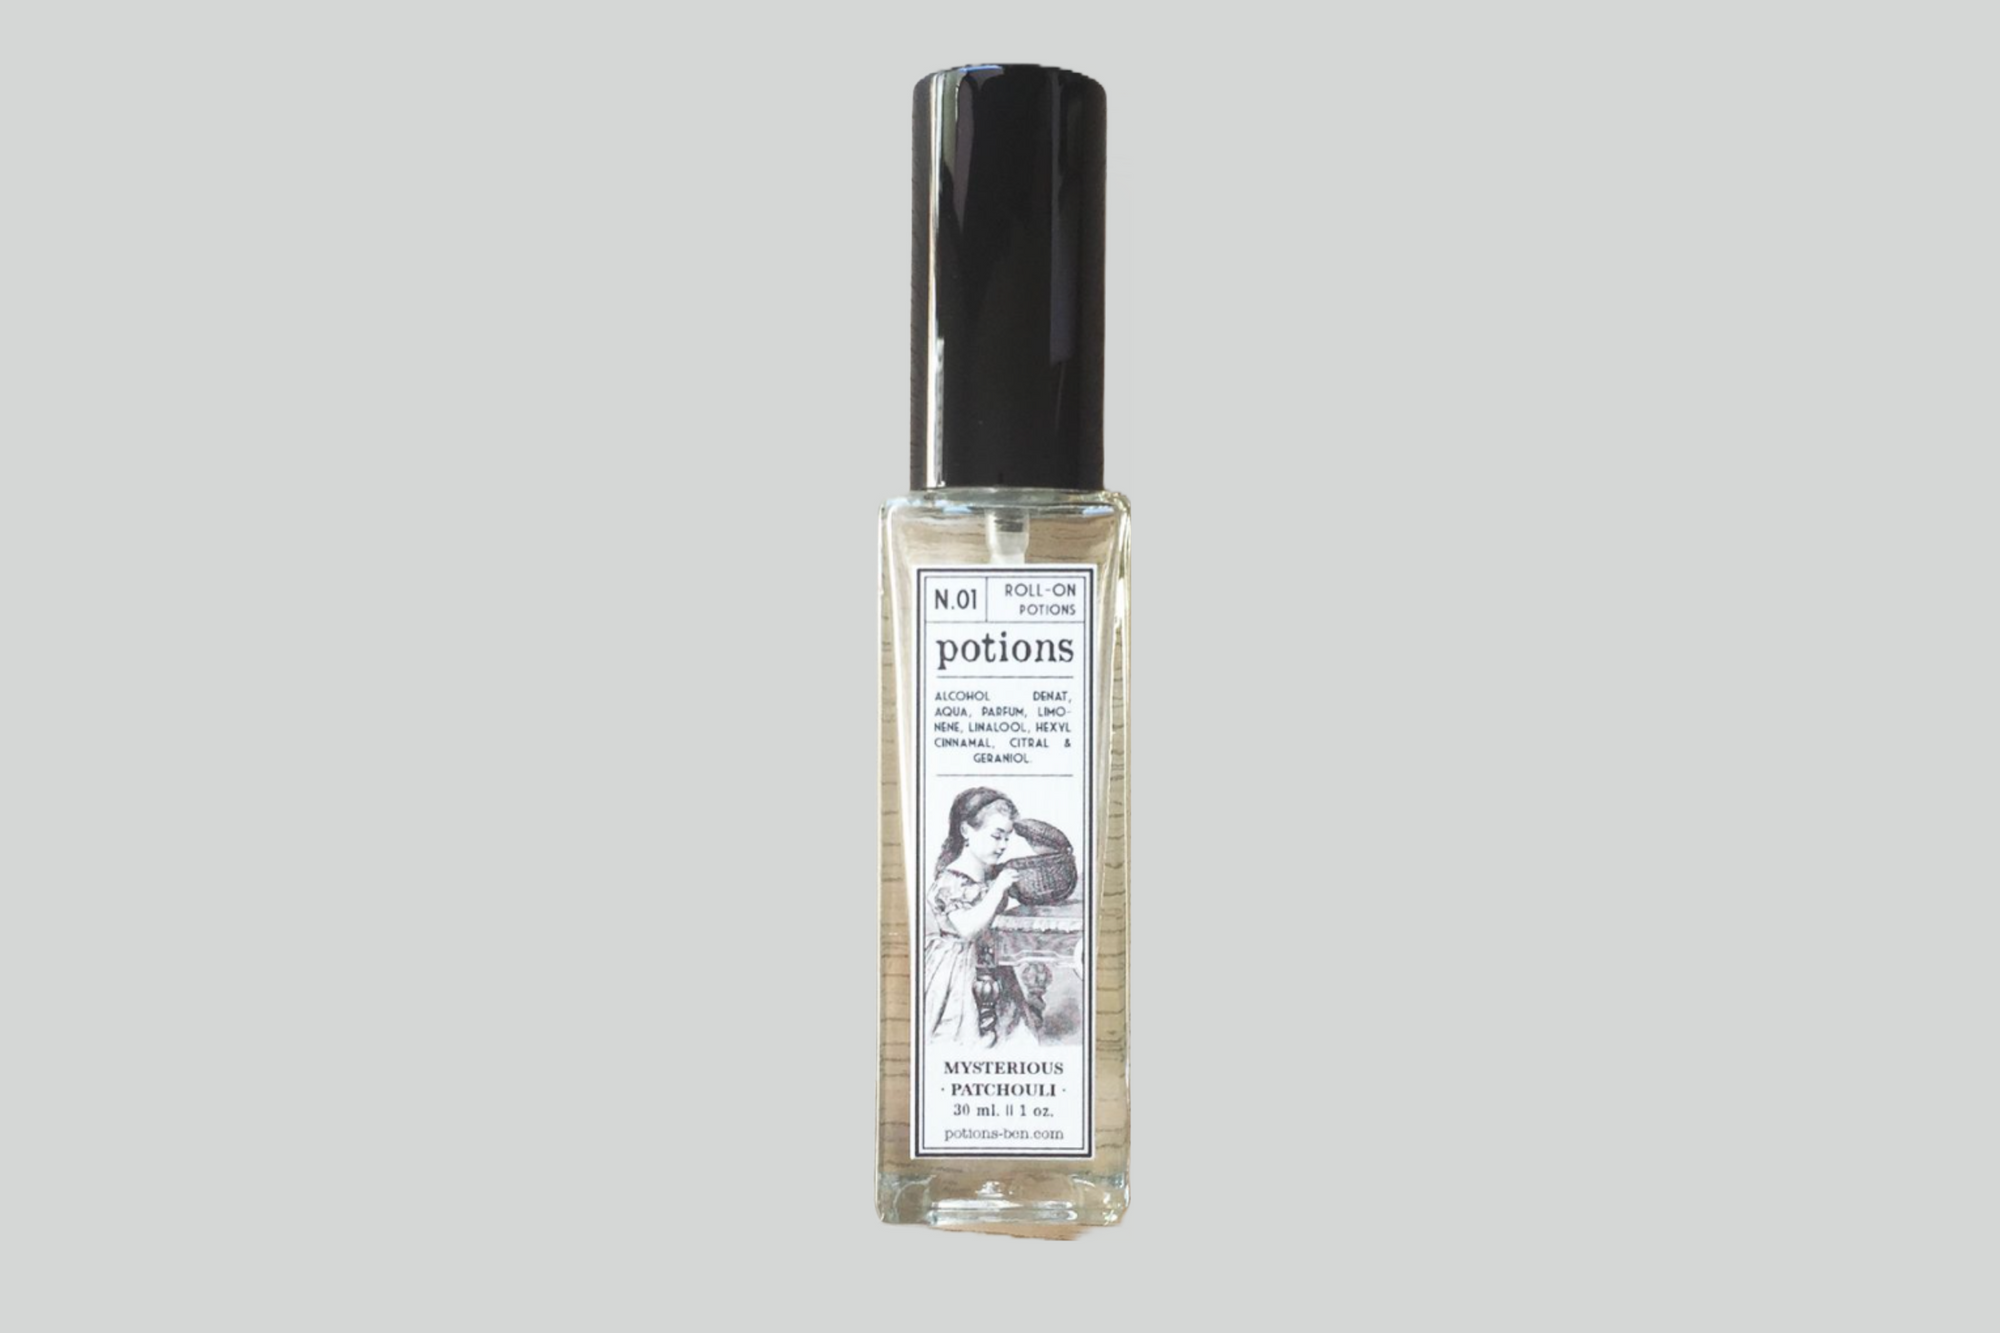 Perfume N.01 Mysterious Patchouli